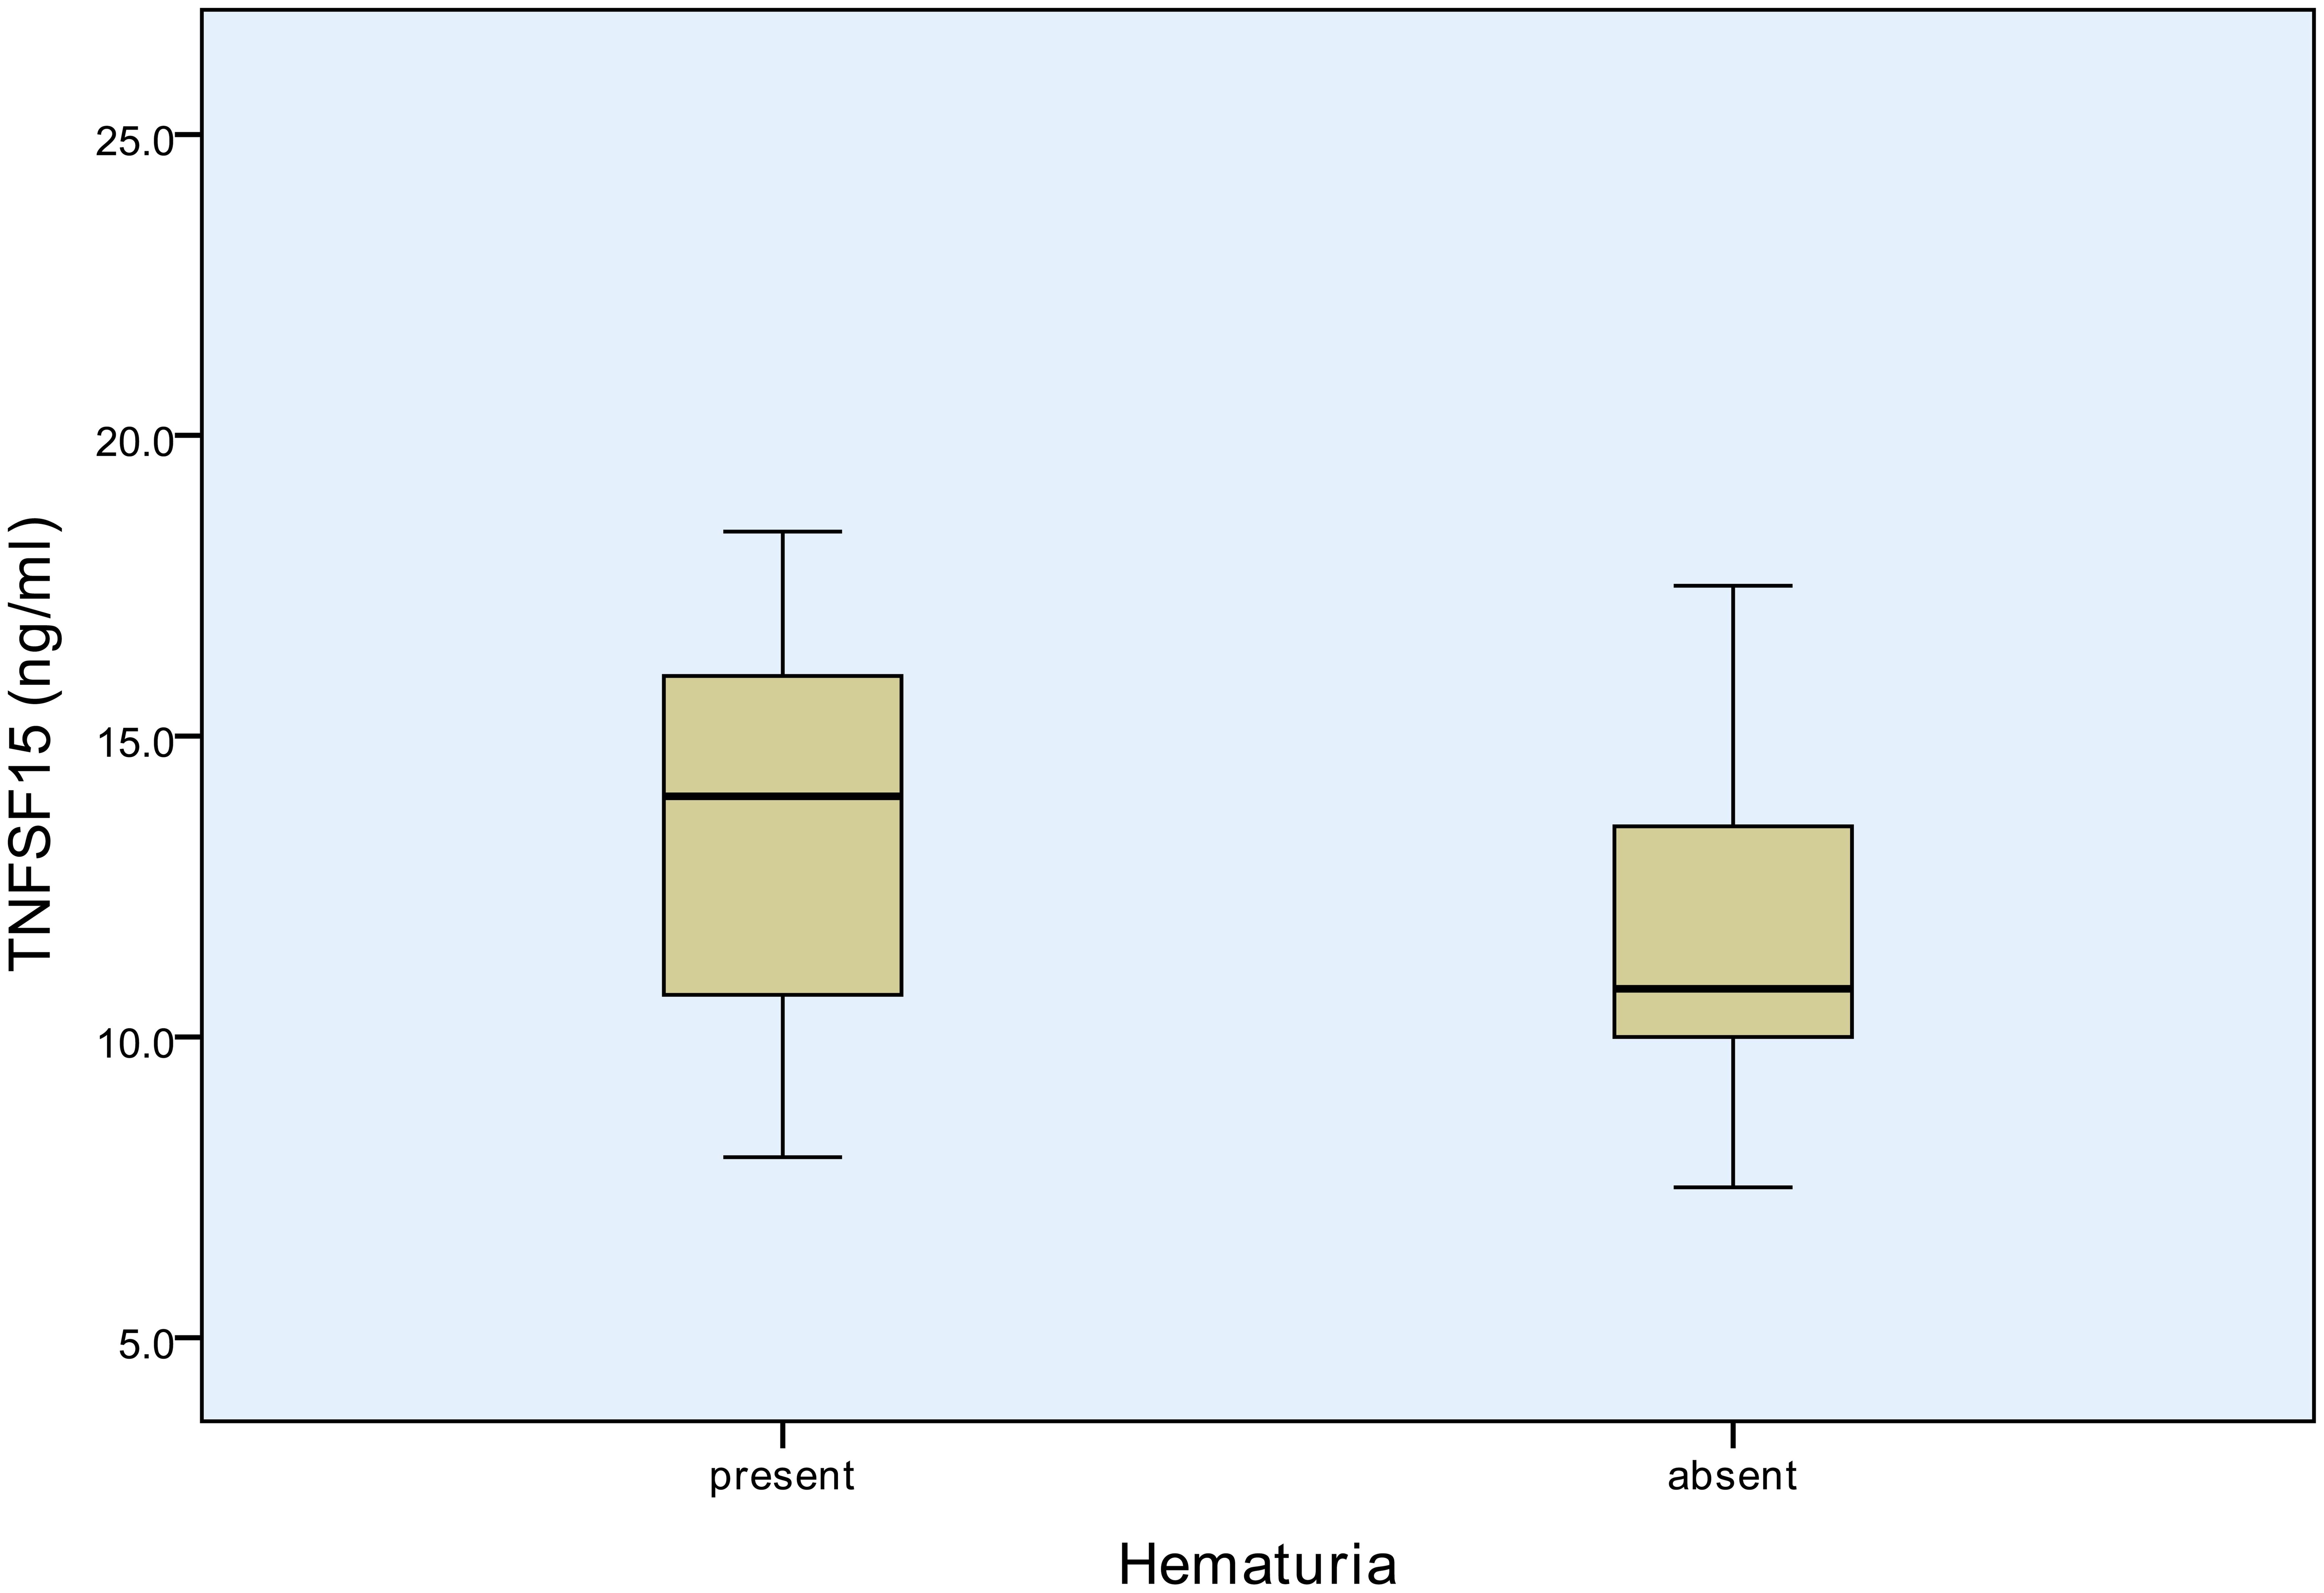 Median TNFSF15 concentration in SLE patients with and without hematuria.